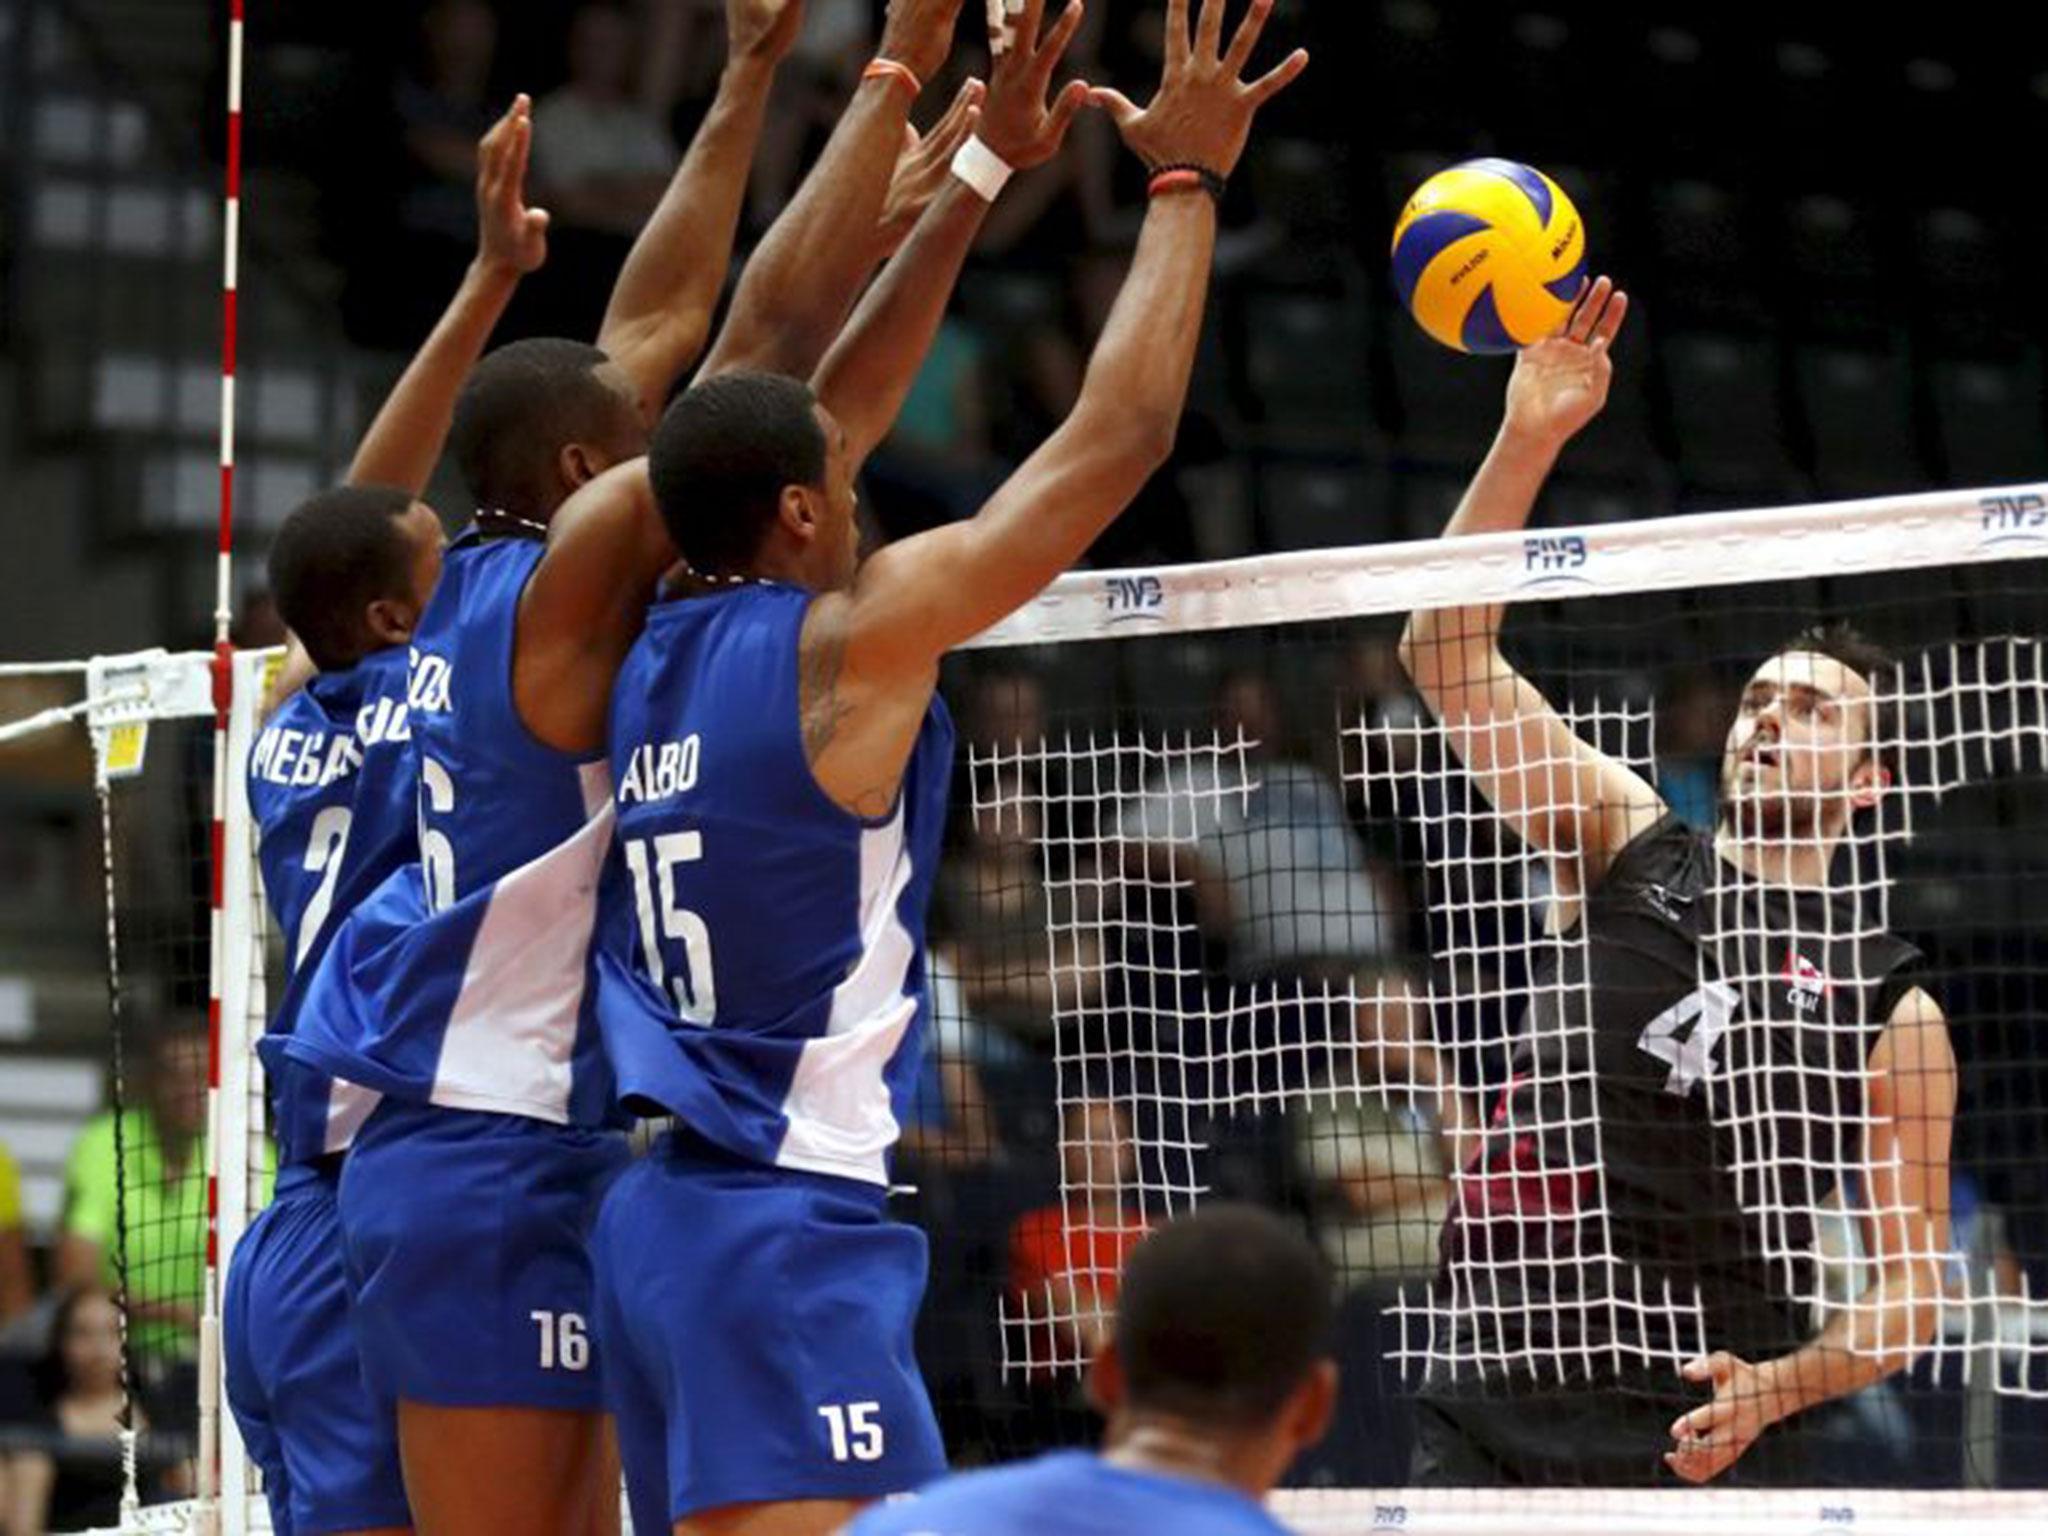 File photo taken on shows (L-R) Abrahan Alfonso Gavilan, Luis Tomas Sosa Sierra and Dariel Albo Miranda of Cuba defending against the Canadian team during a match at the 2016 Volleyball World League in Tampere, Finland.